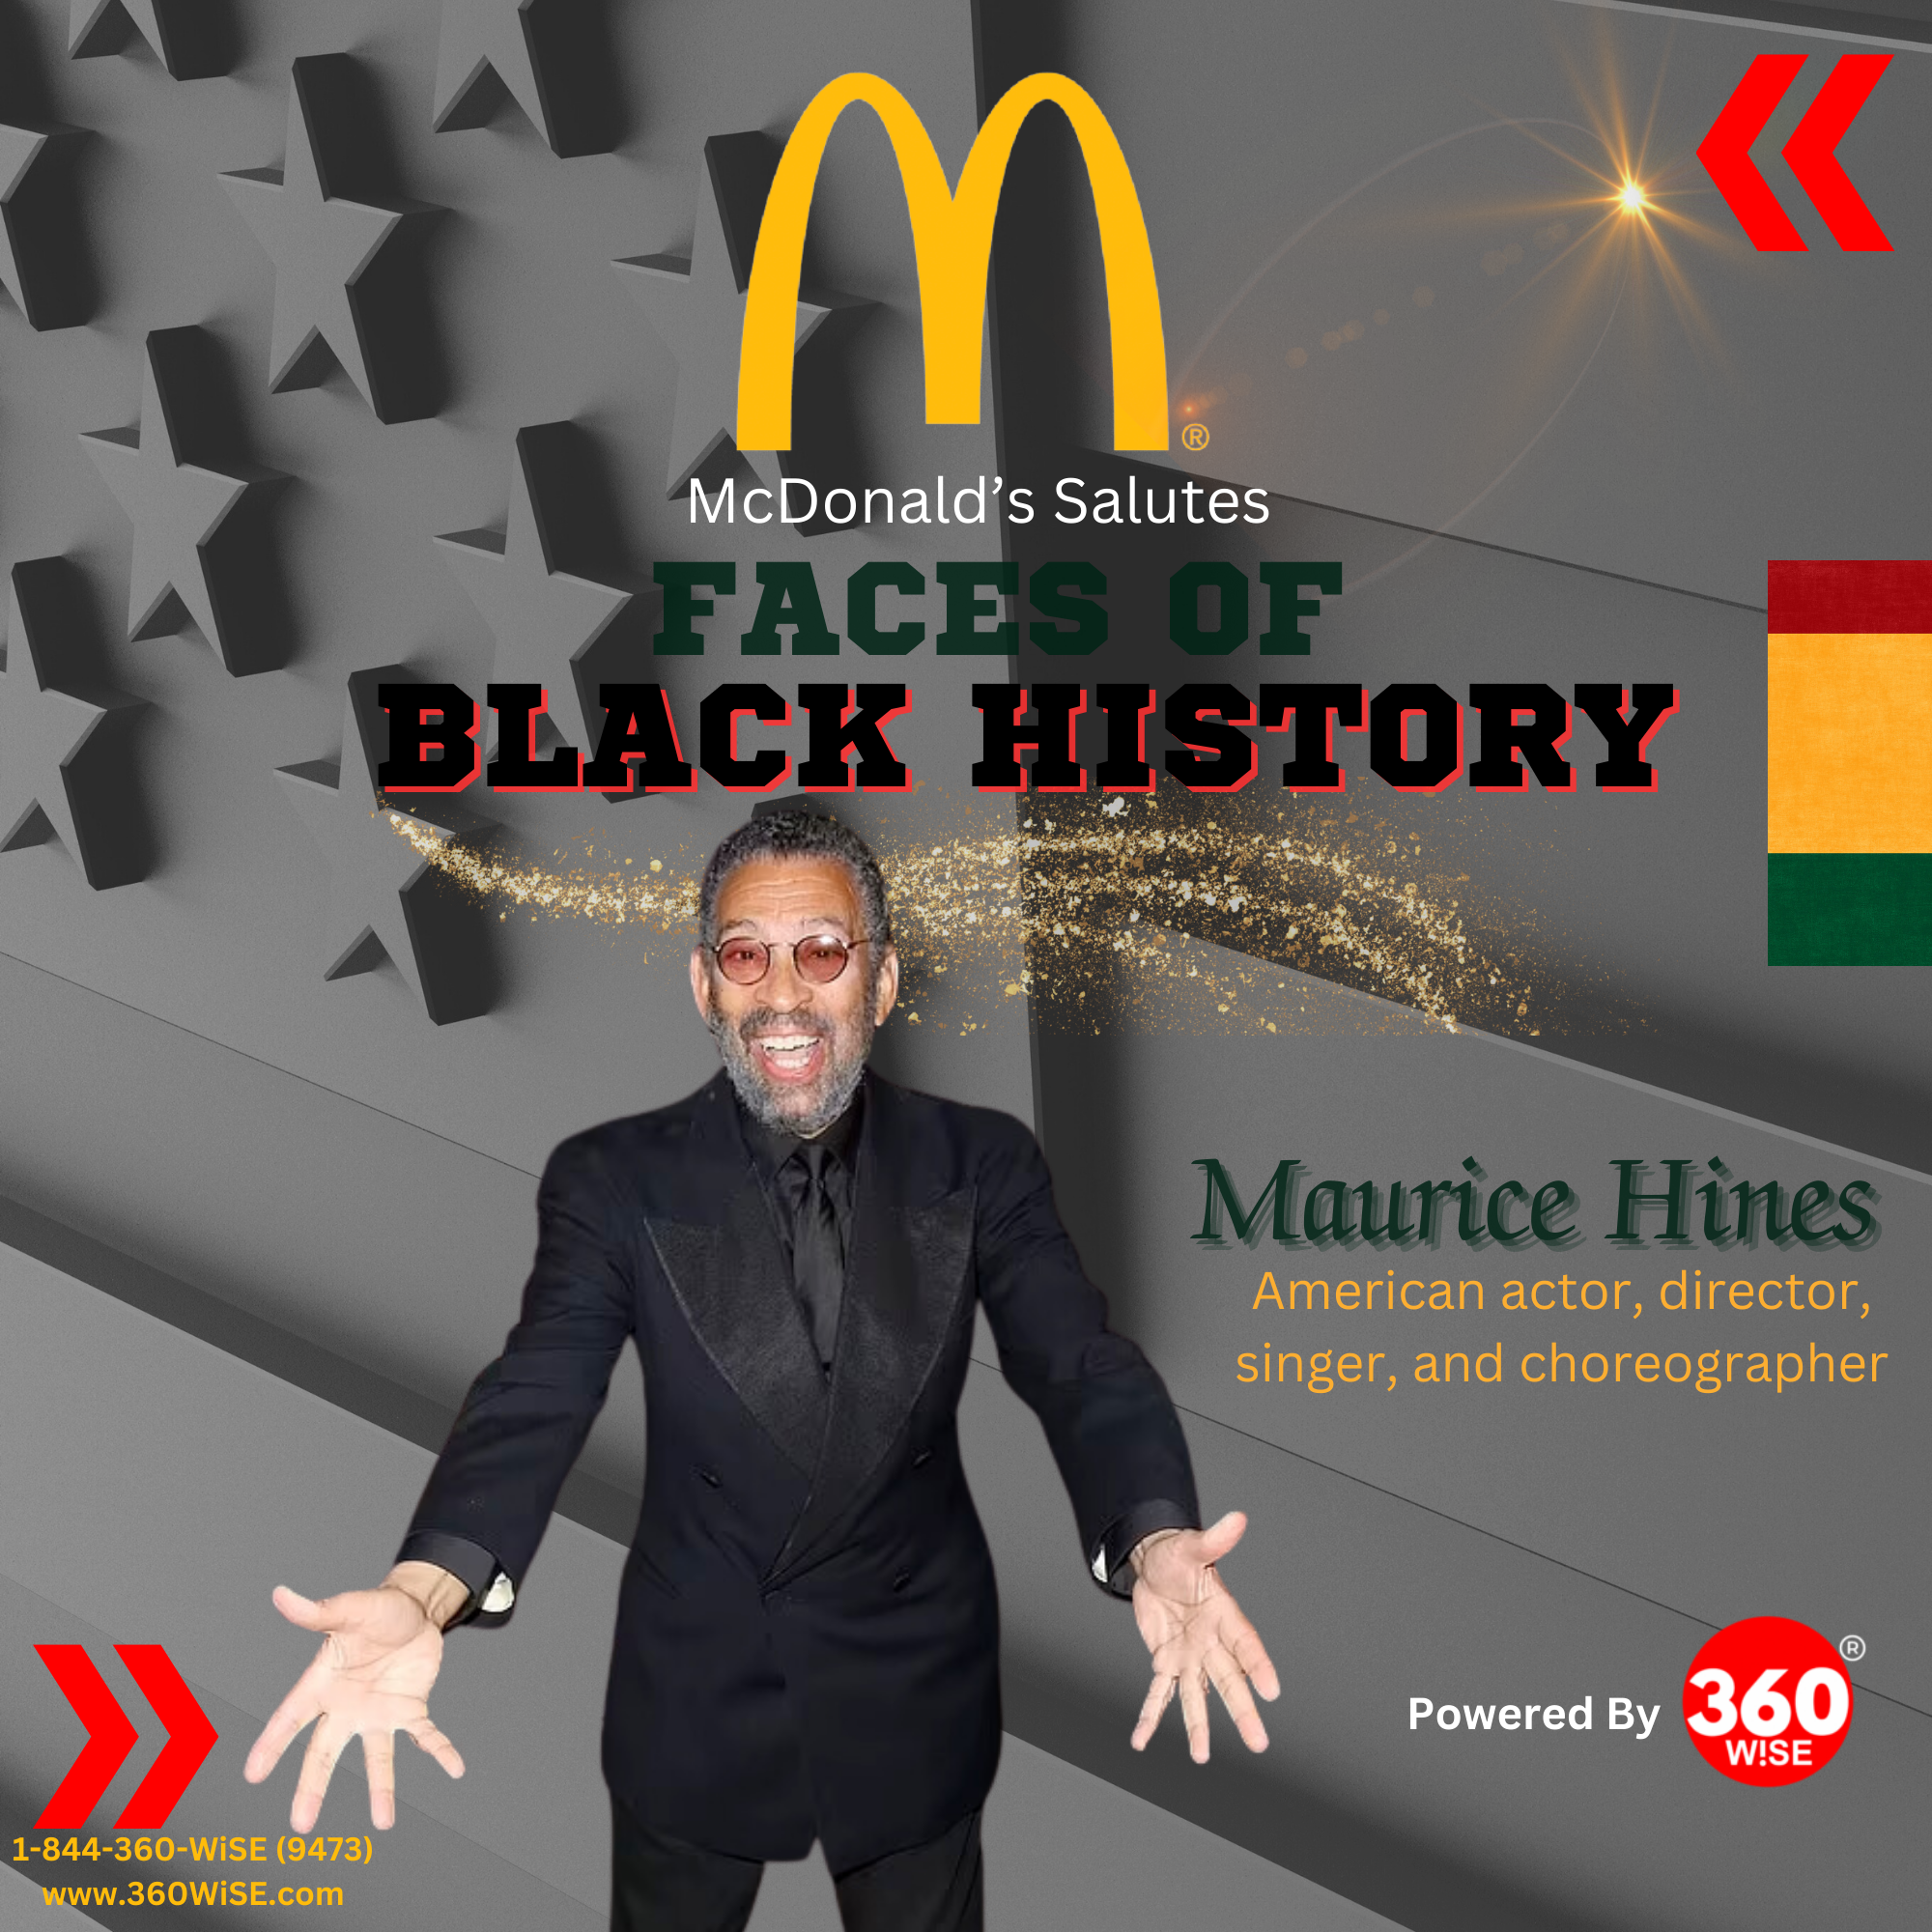 McDonald's Faces of Black History Salutes Maurice Hines. Powered by 360WiSE